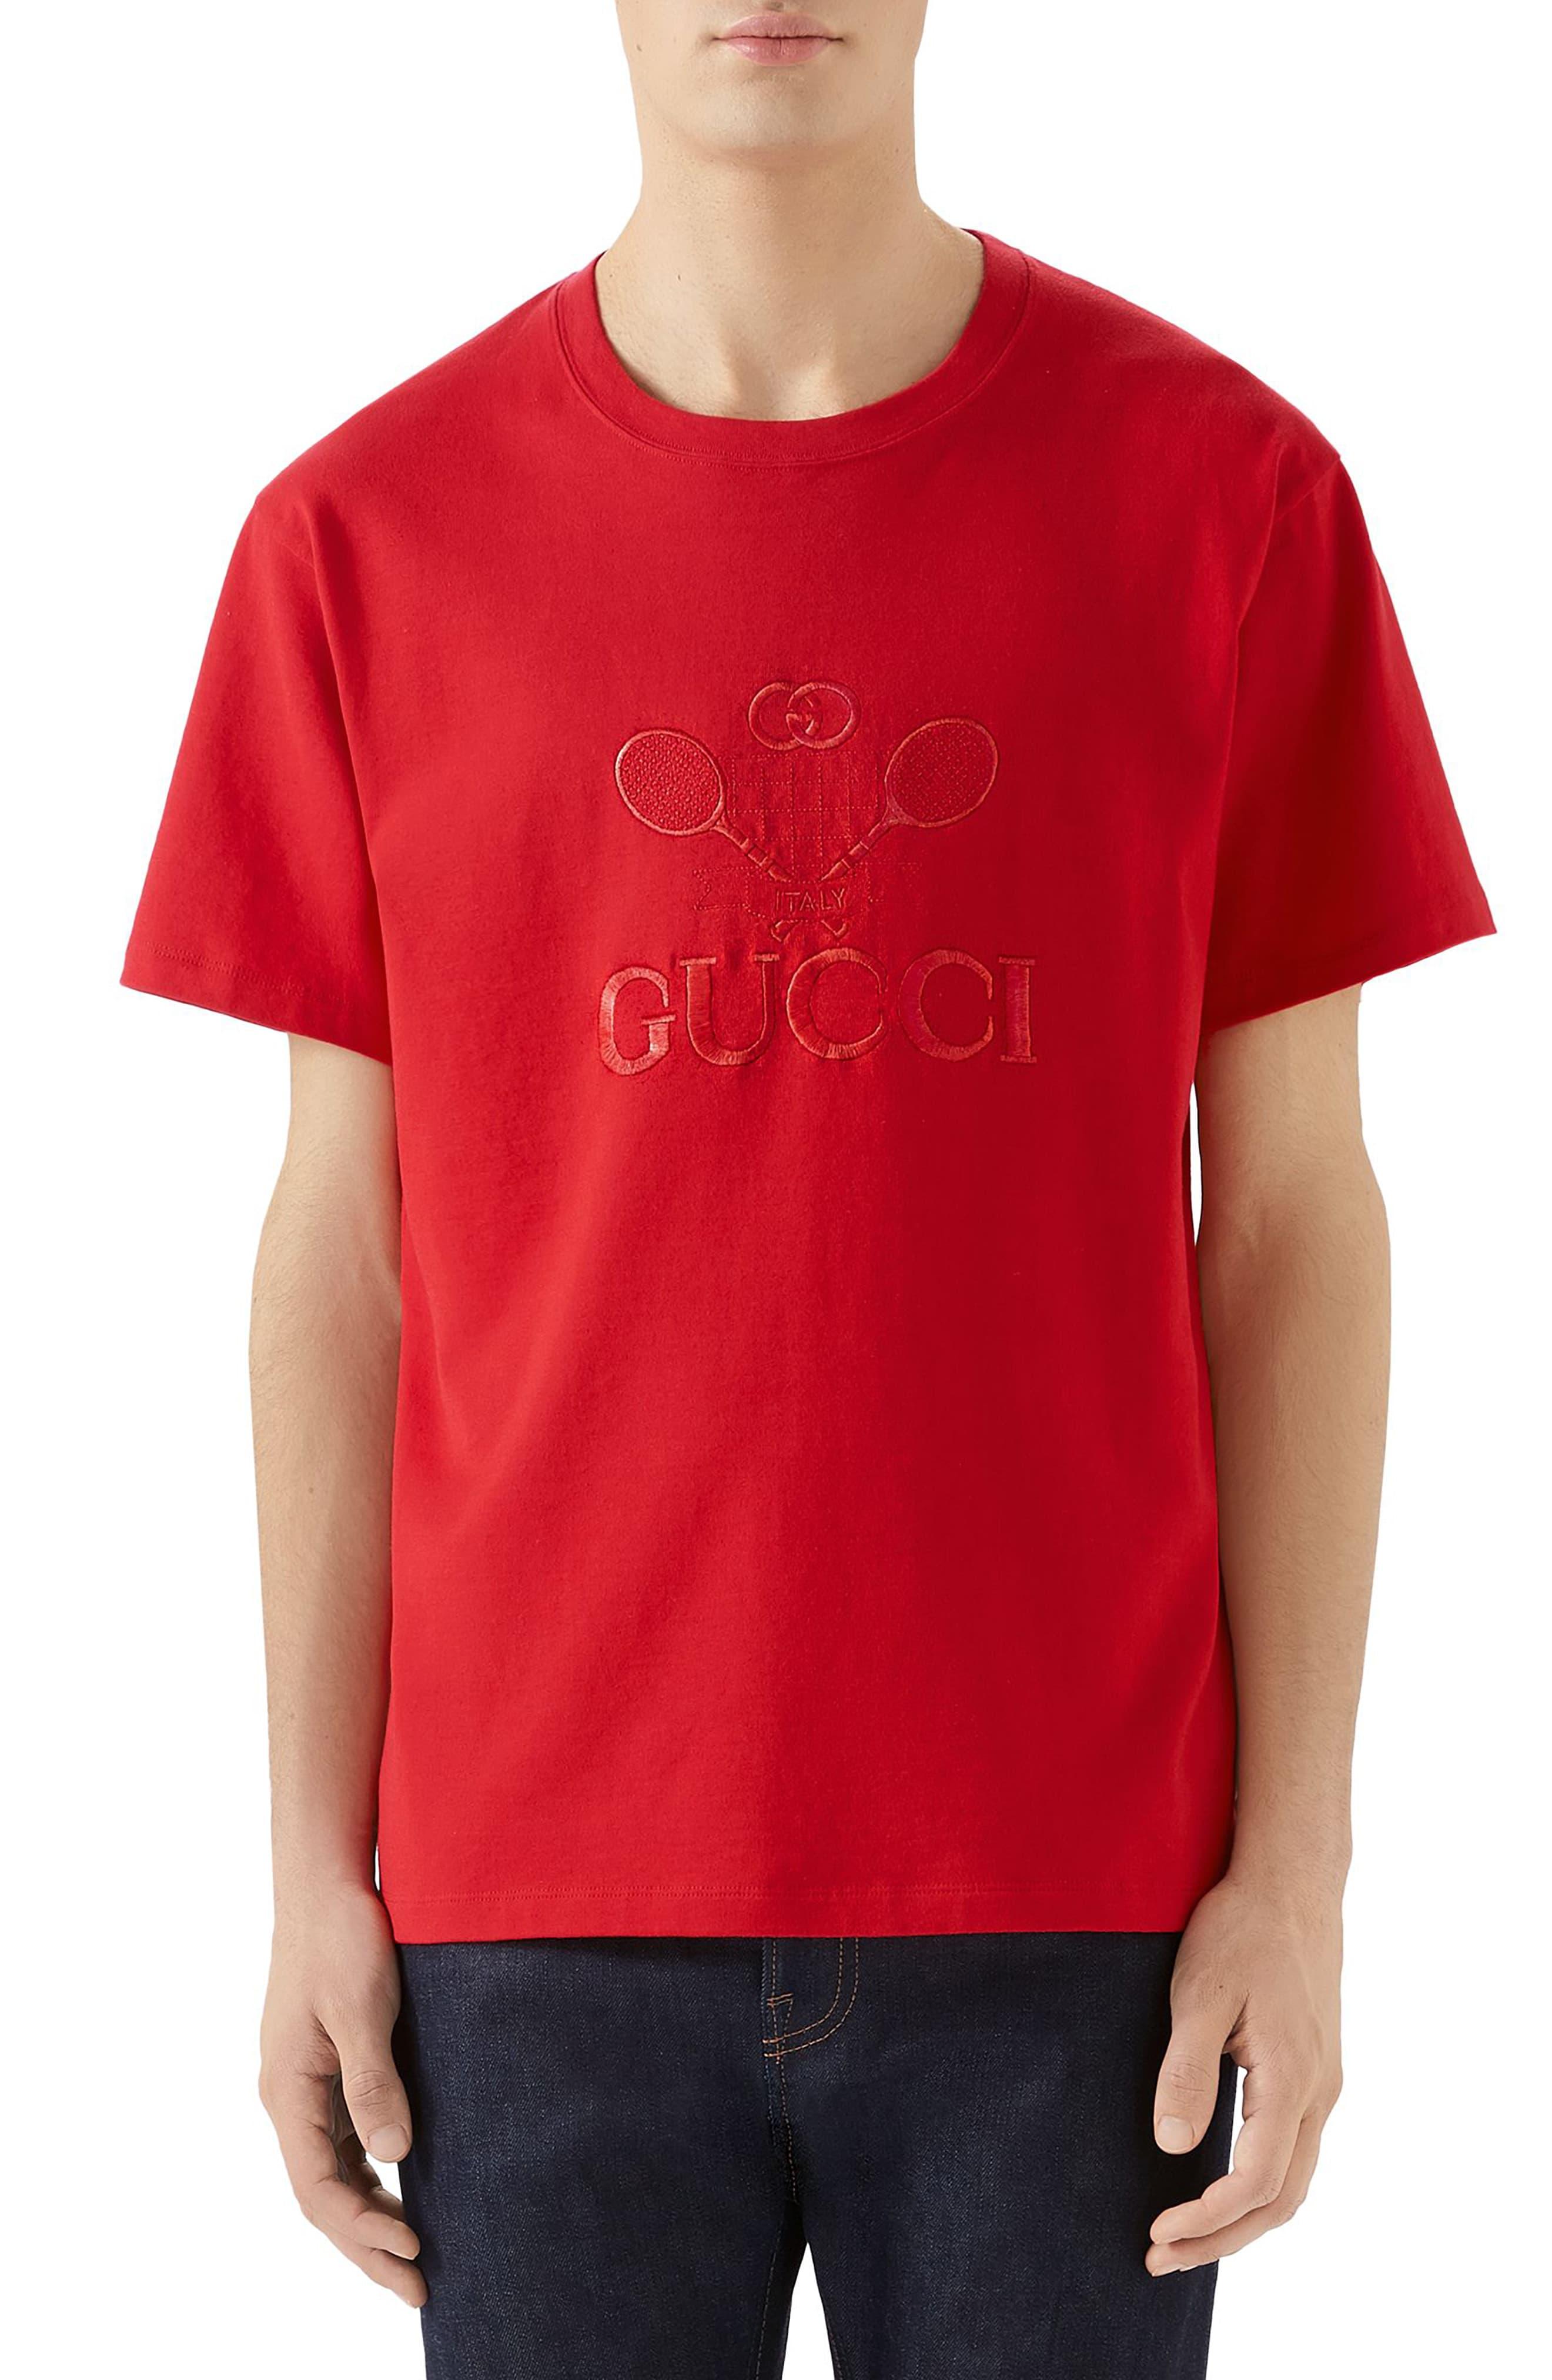 Gucci Tennis Embroidered Cotton T-shirt in Red for Men - Lyst